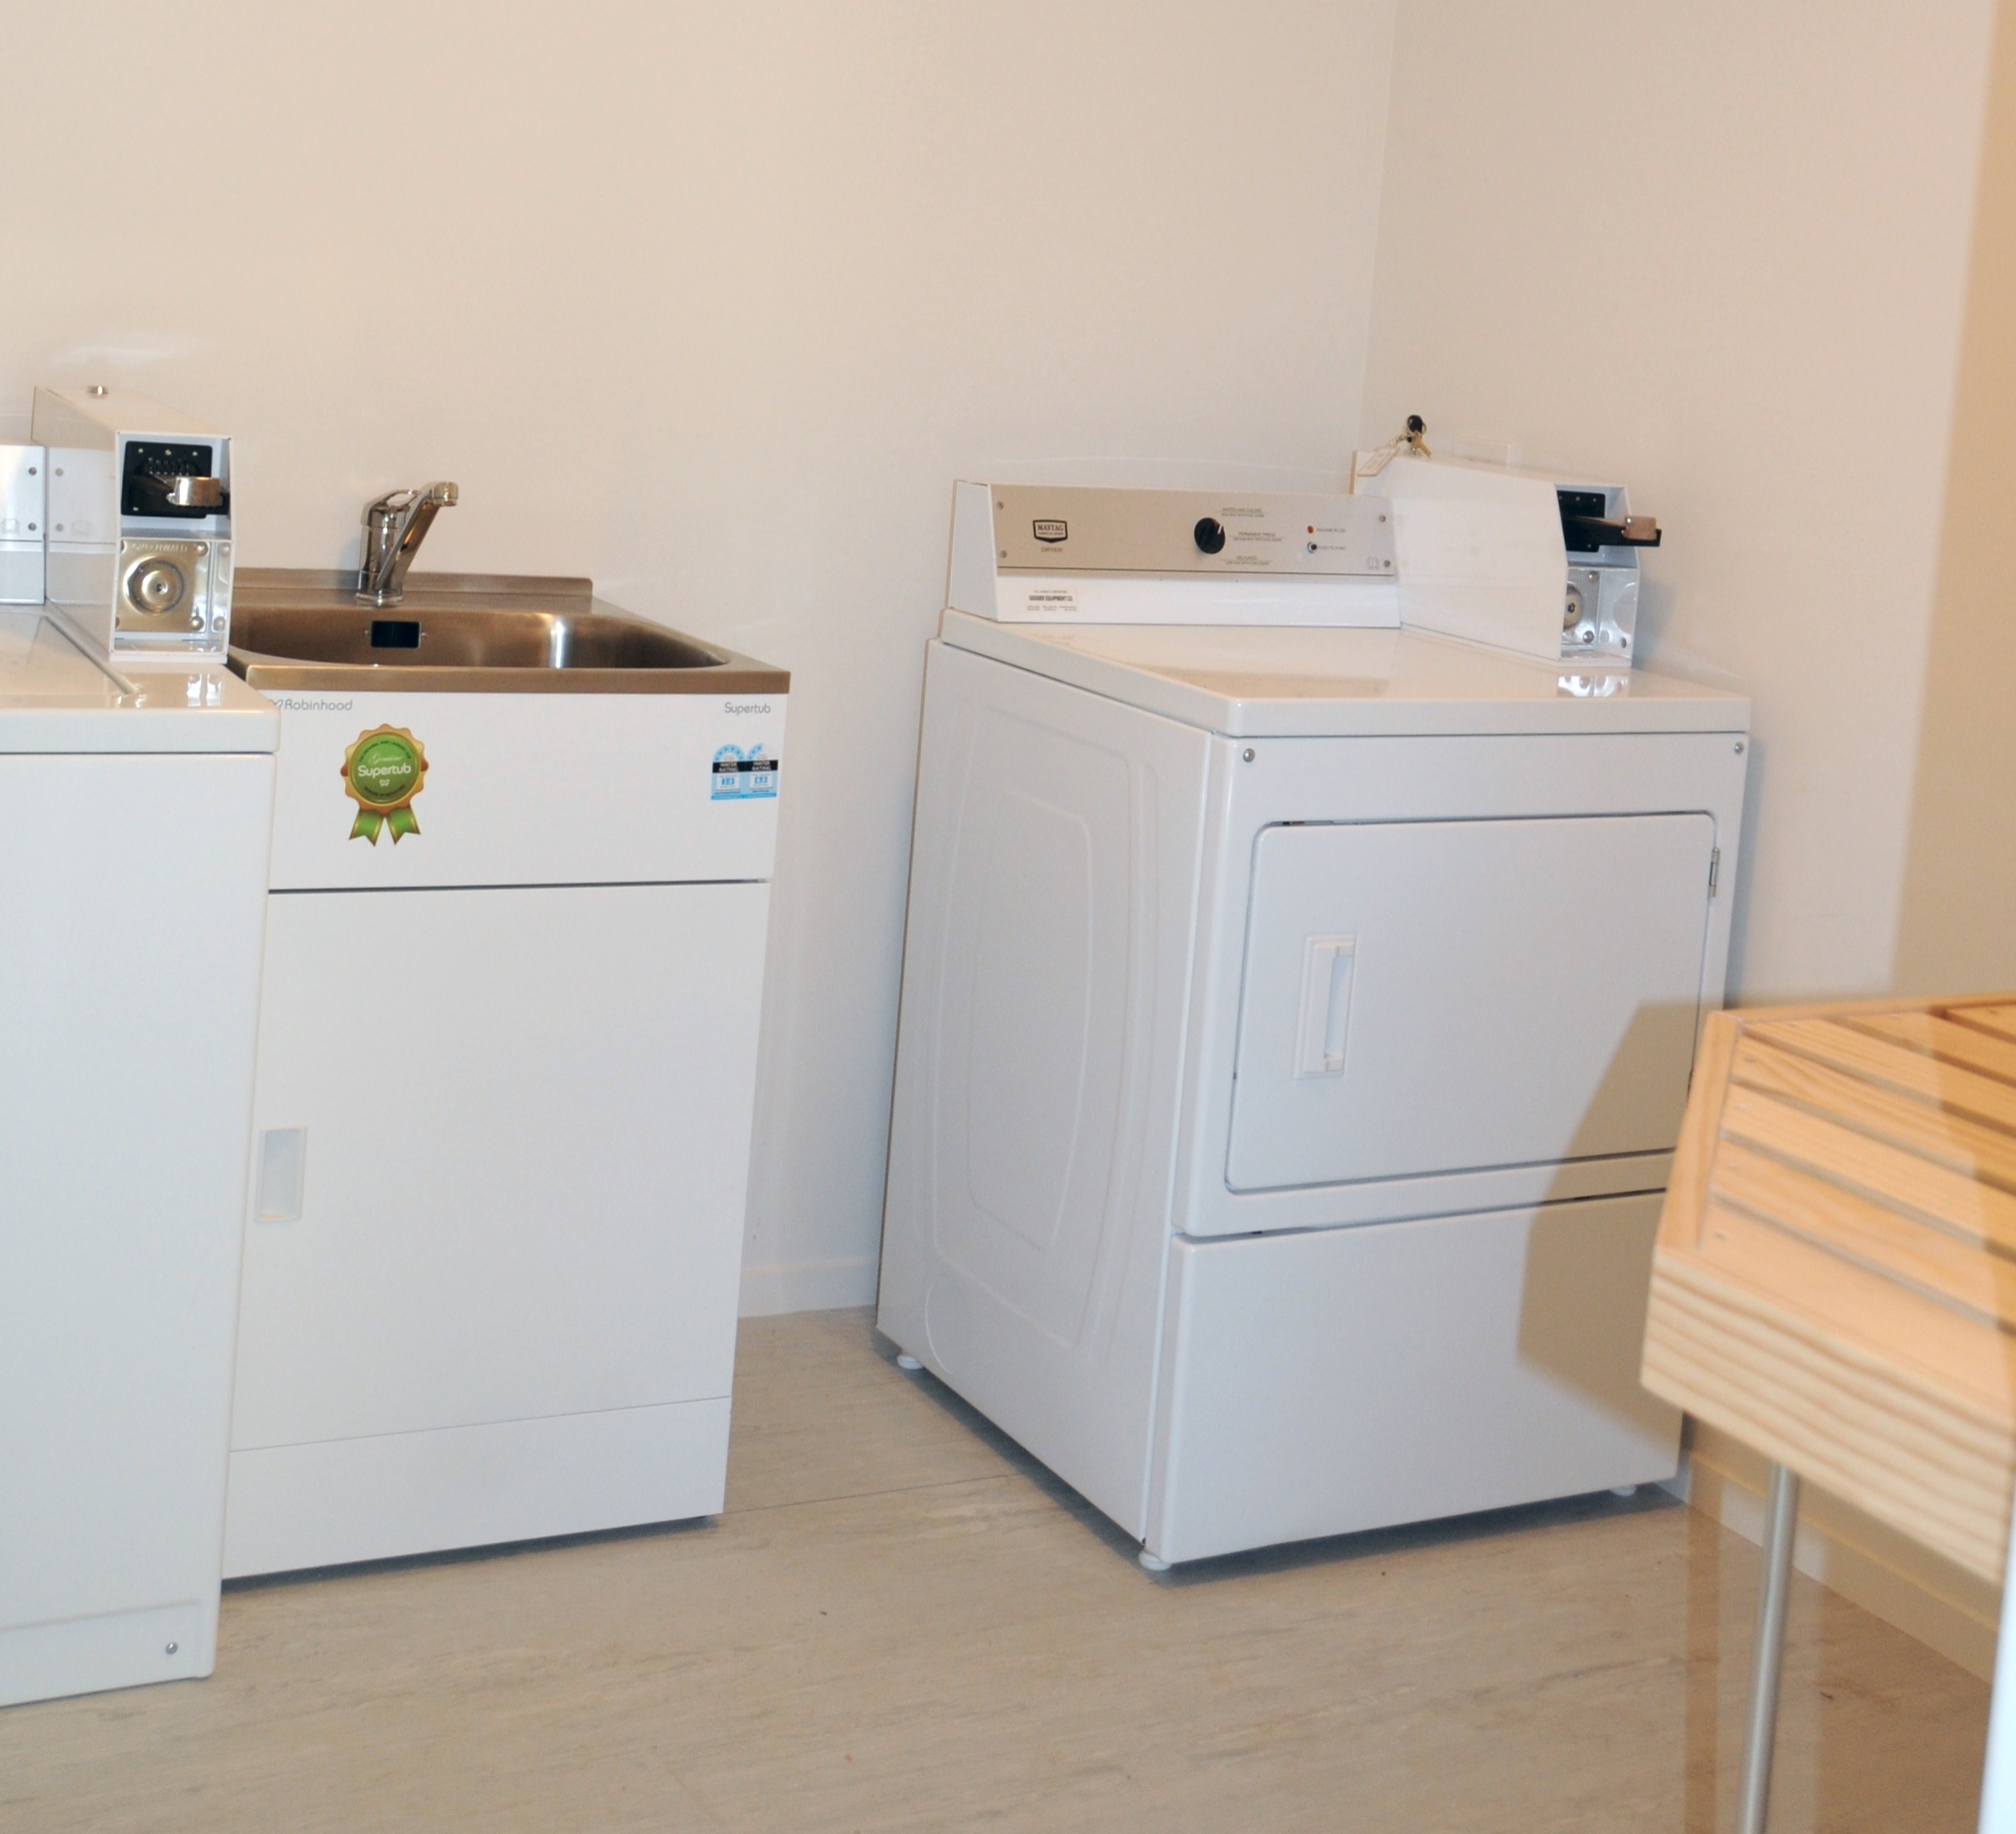 Laundry with coin operated washer and dryer